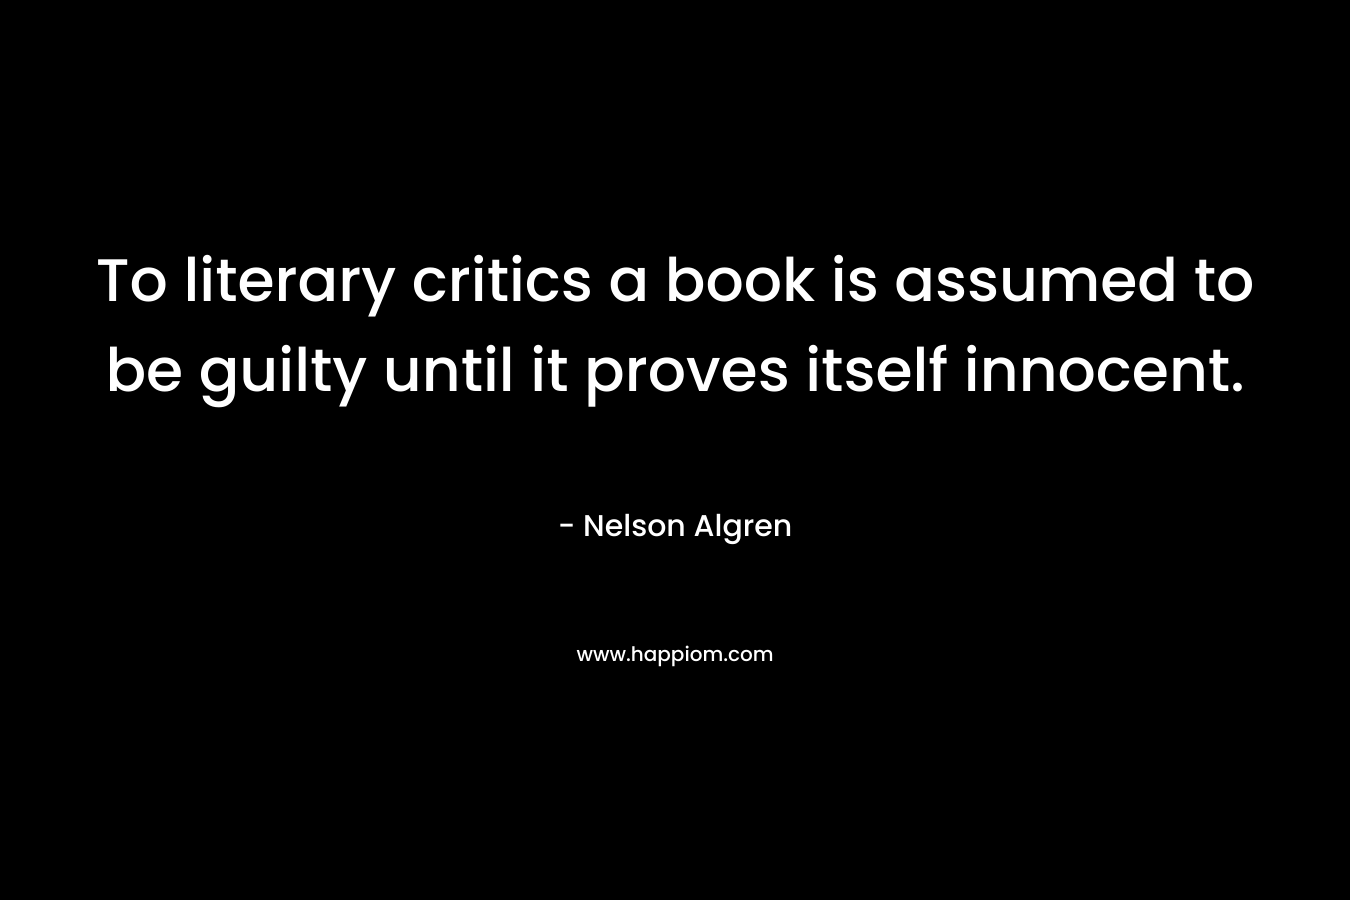 To literary critics a book is assumed to be guilty until it proves itself innocent. – Nelson Algren